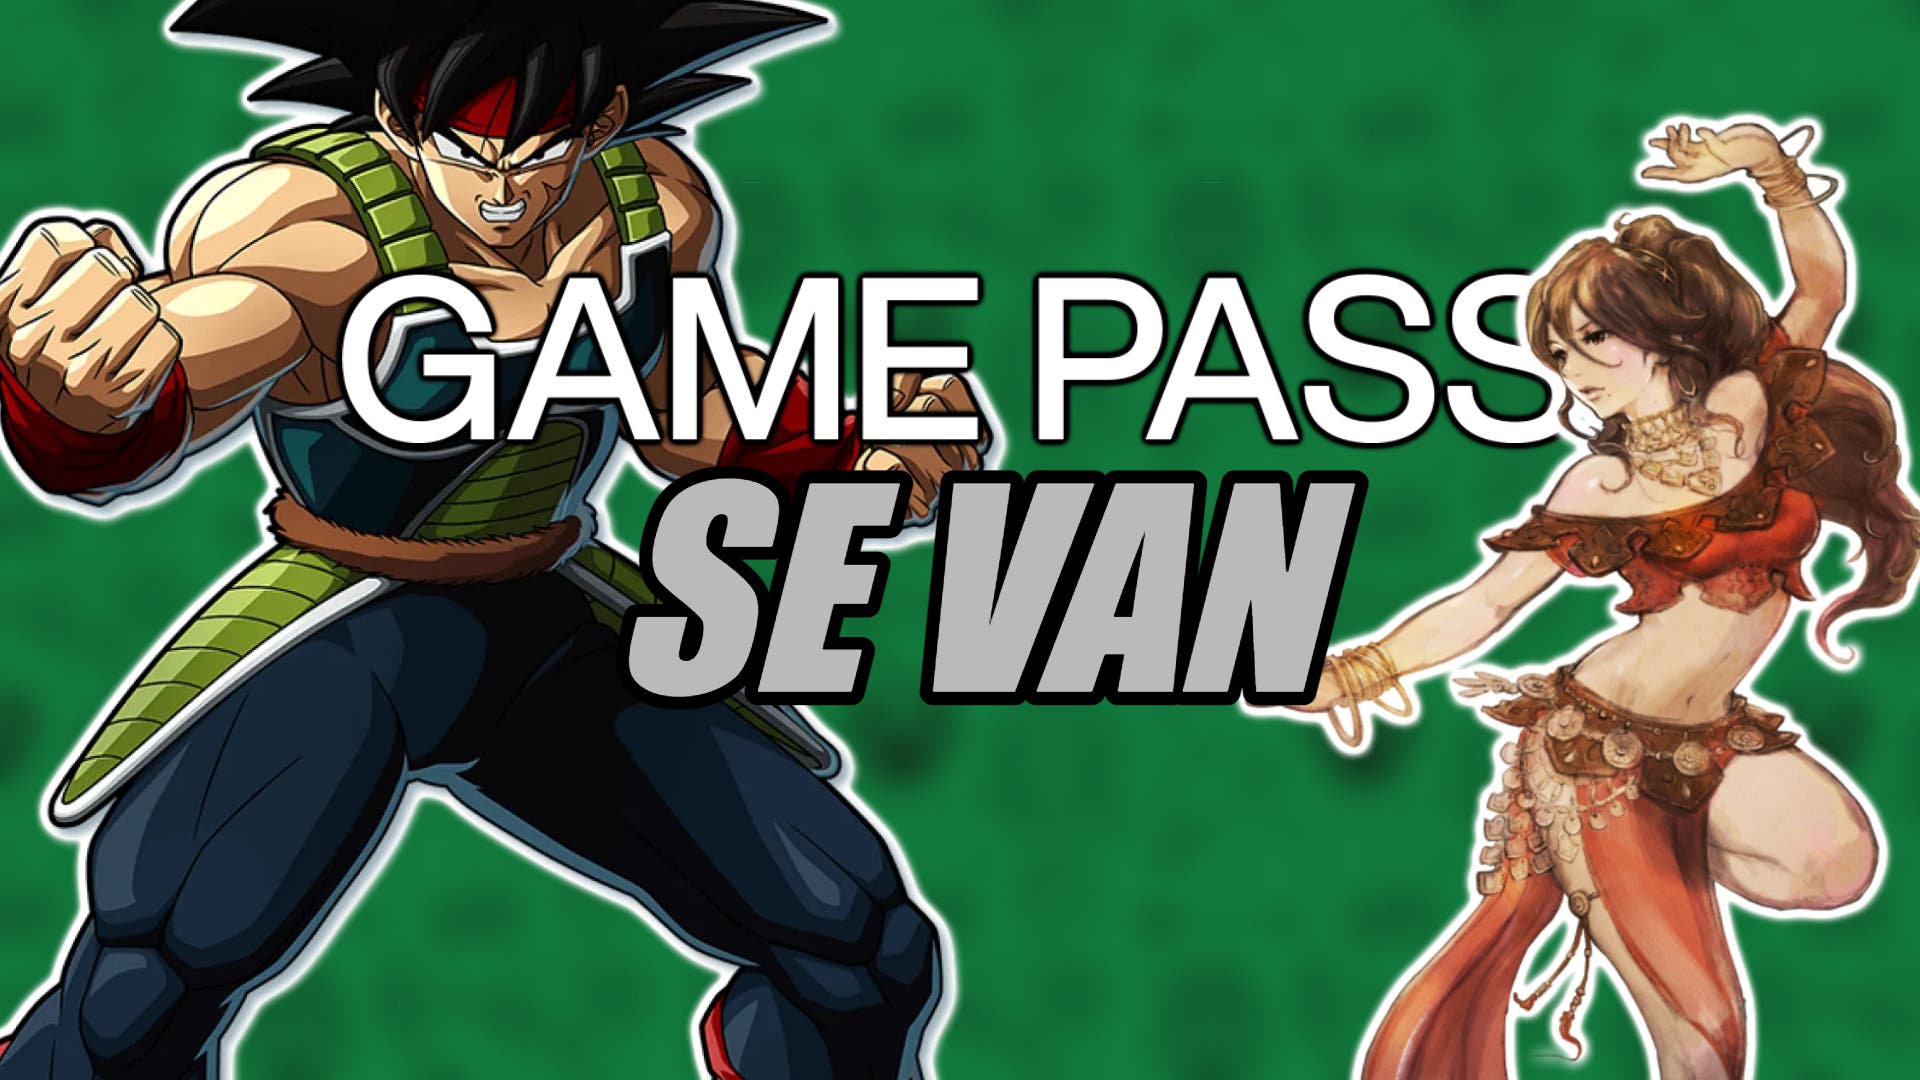 Game Pass will soon lose top games such as Octopath Traveler or Dragon Ball FighterZ